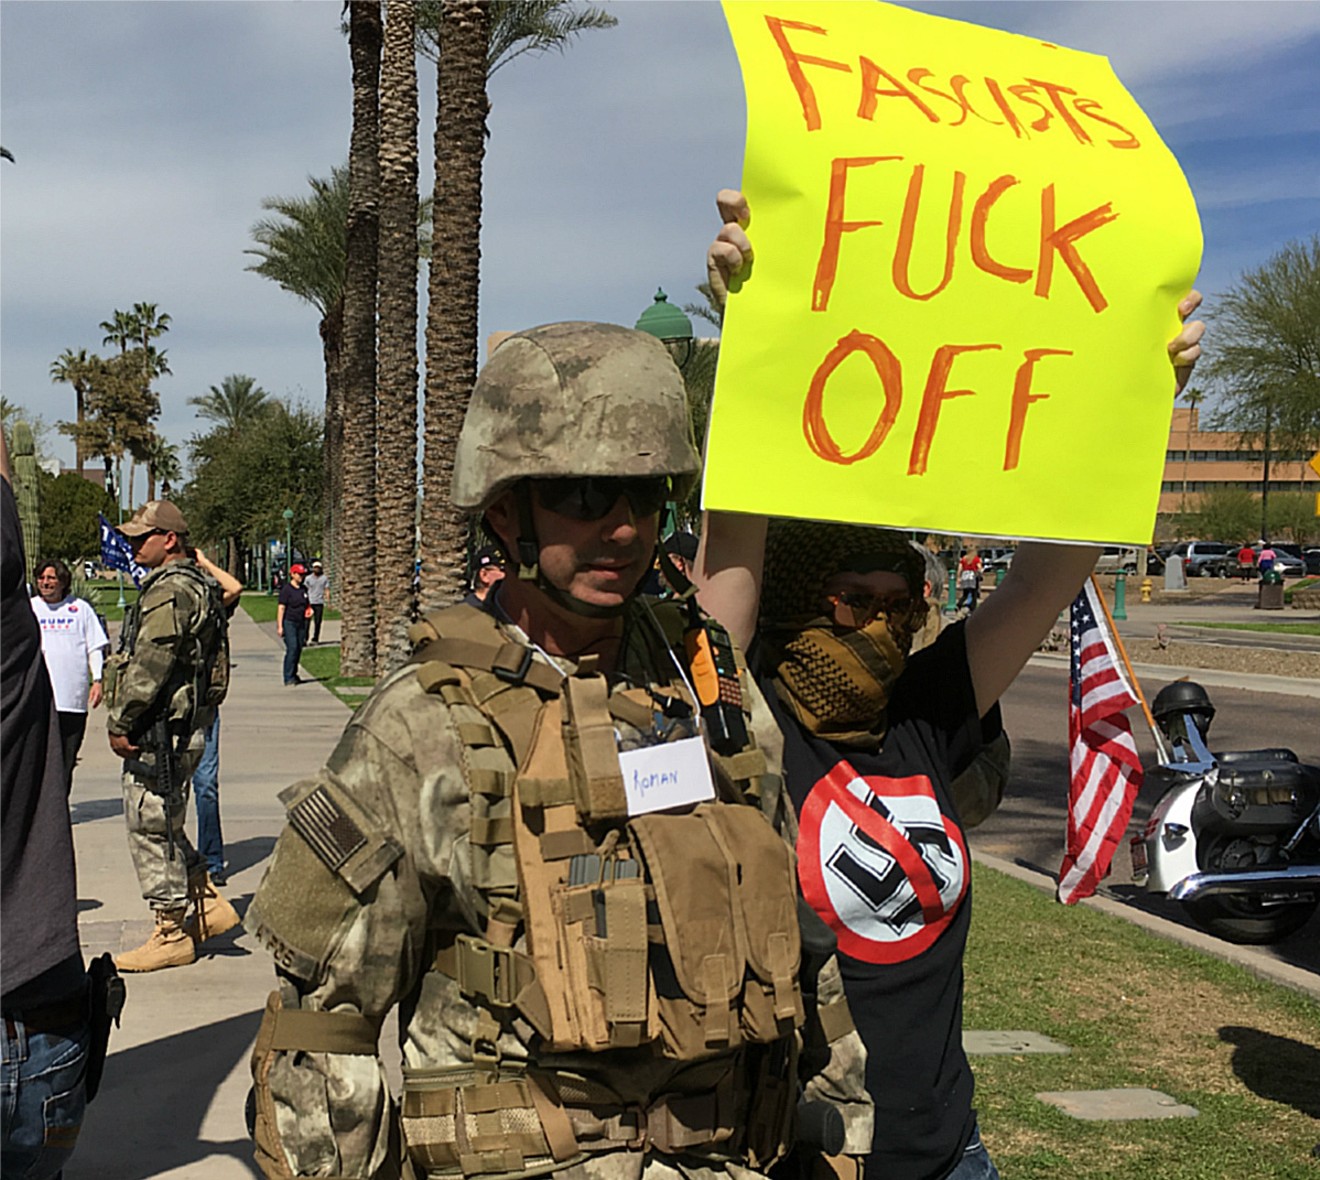 One of several heavily-armed militiamen (left) doing security at Saturday's March4Trump at the Arizona Capitol, while an antifascist gal demonstrates against the gathering.